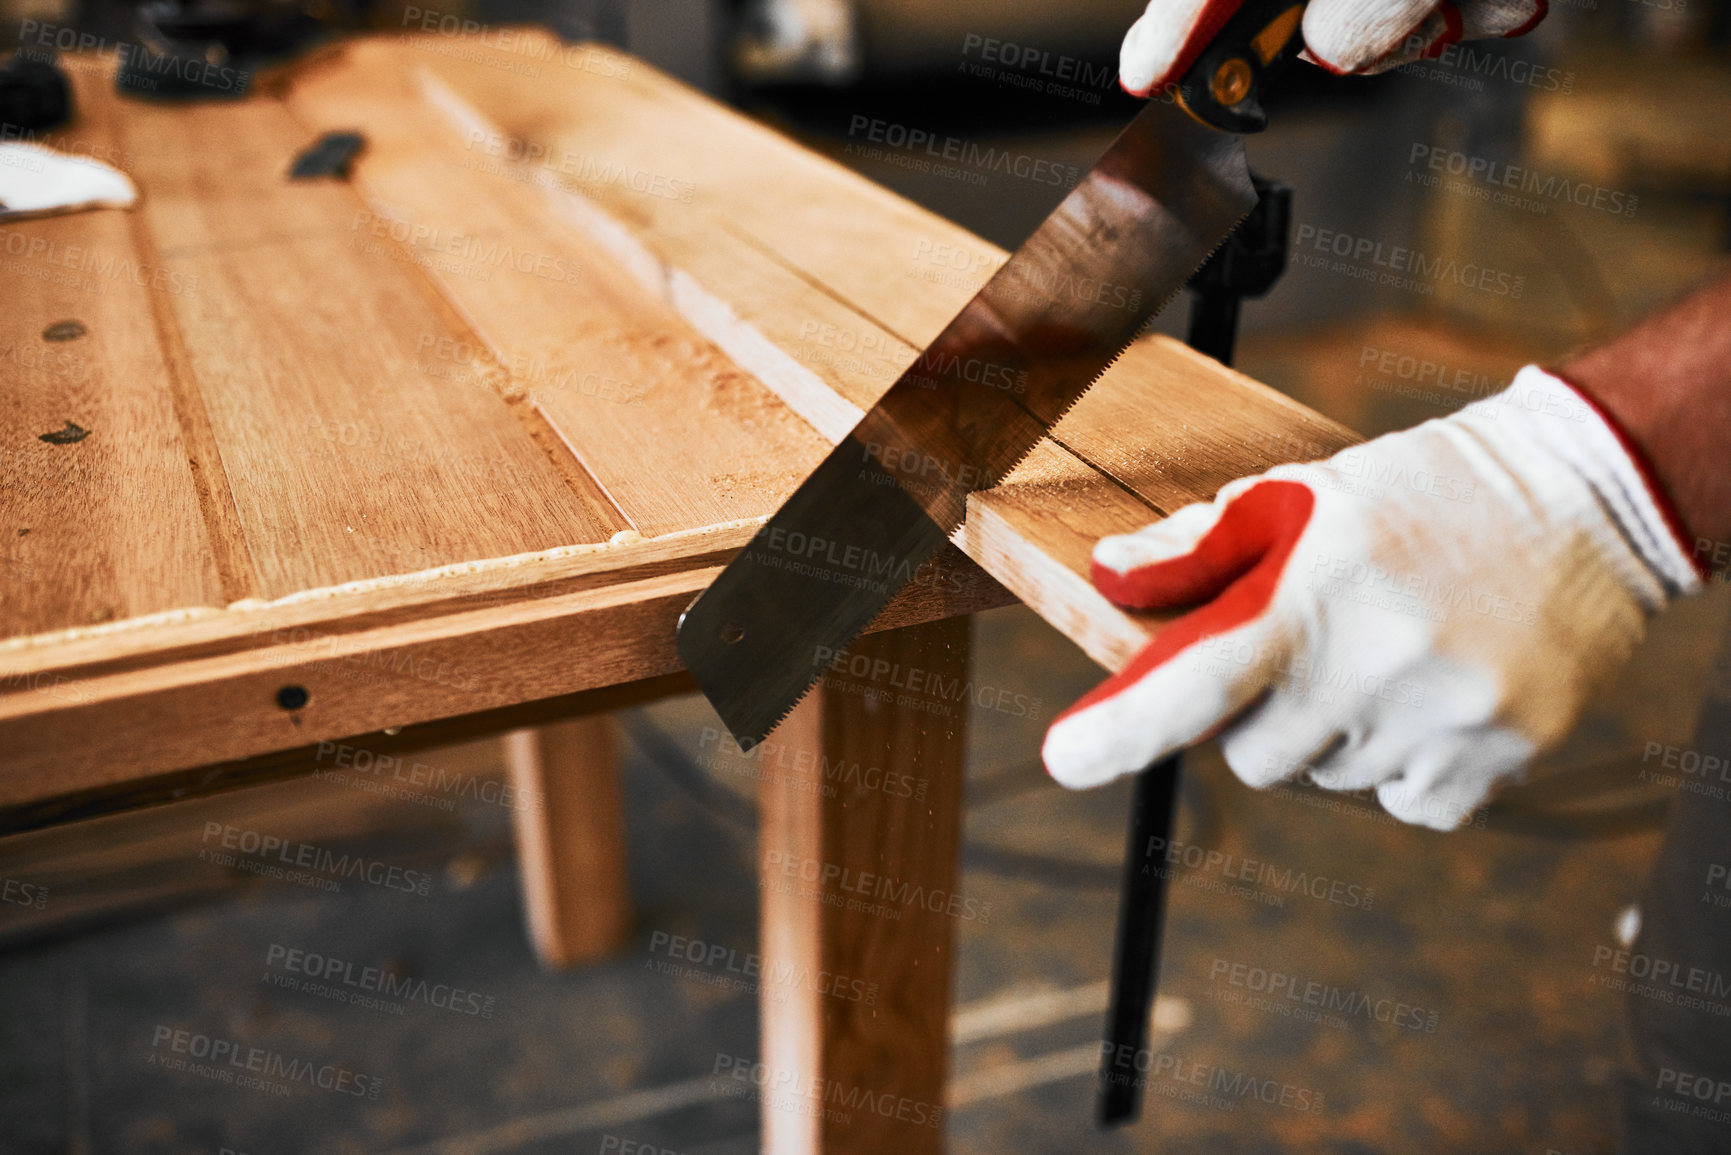 Buy stock photo Cropped shot of an unrecognizable carpenter cutting wood inside a workshop